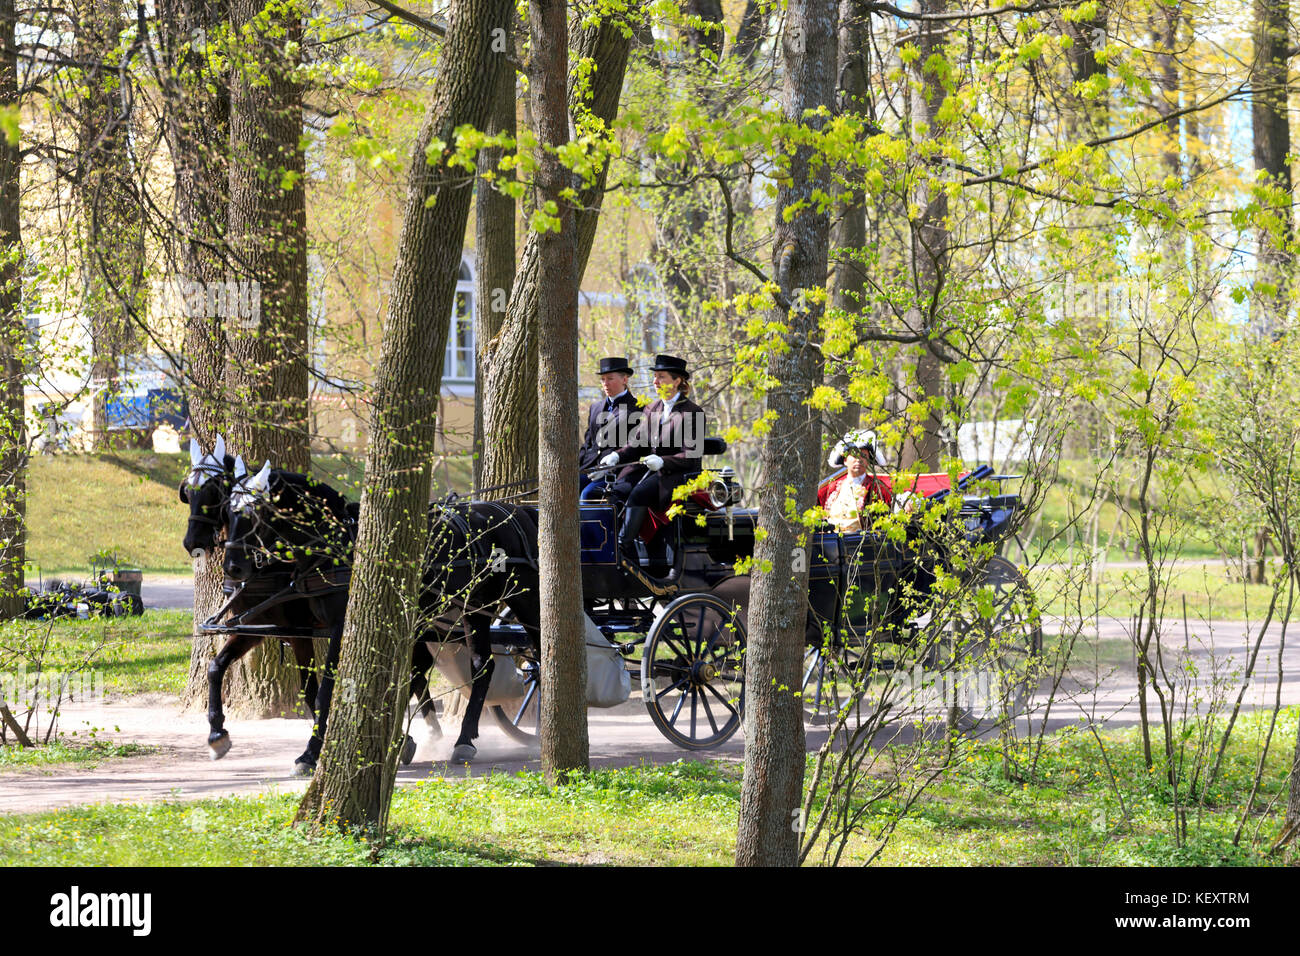 Photograph of horses pulling traditional carriage, Catherine Park, Pushkin, St. Petersburg, Russia Stock Photo